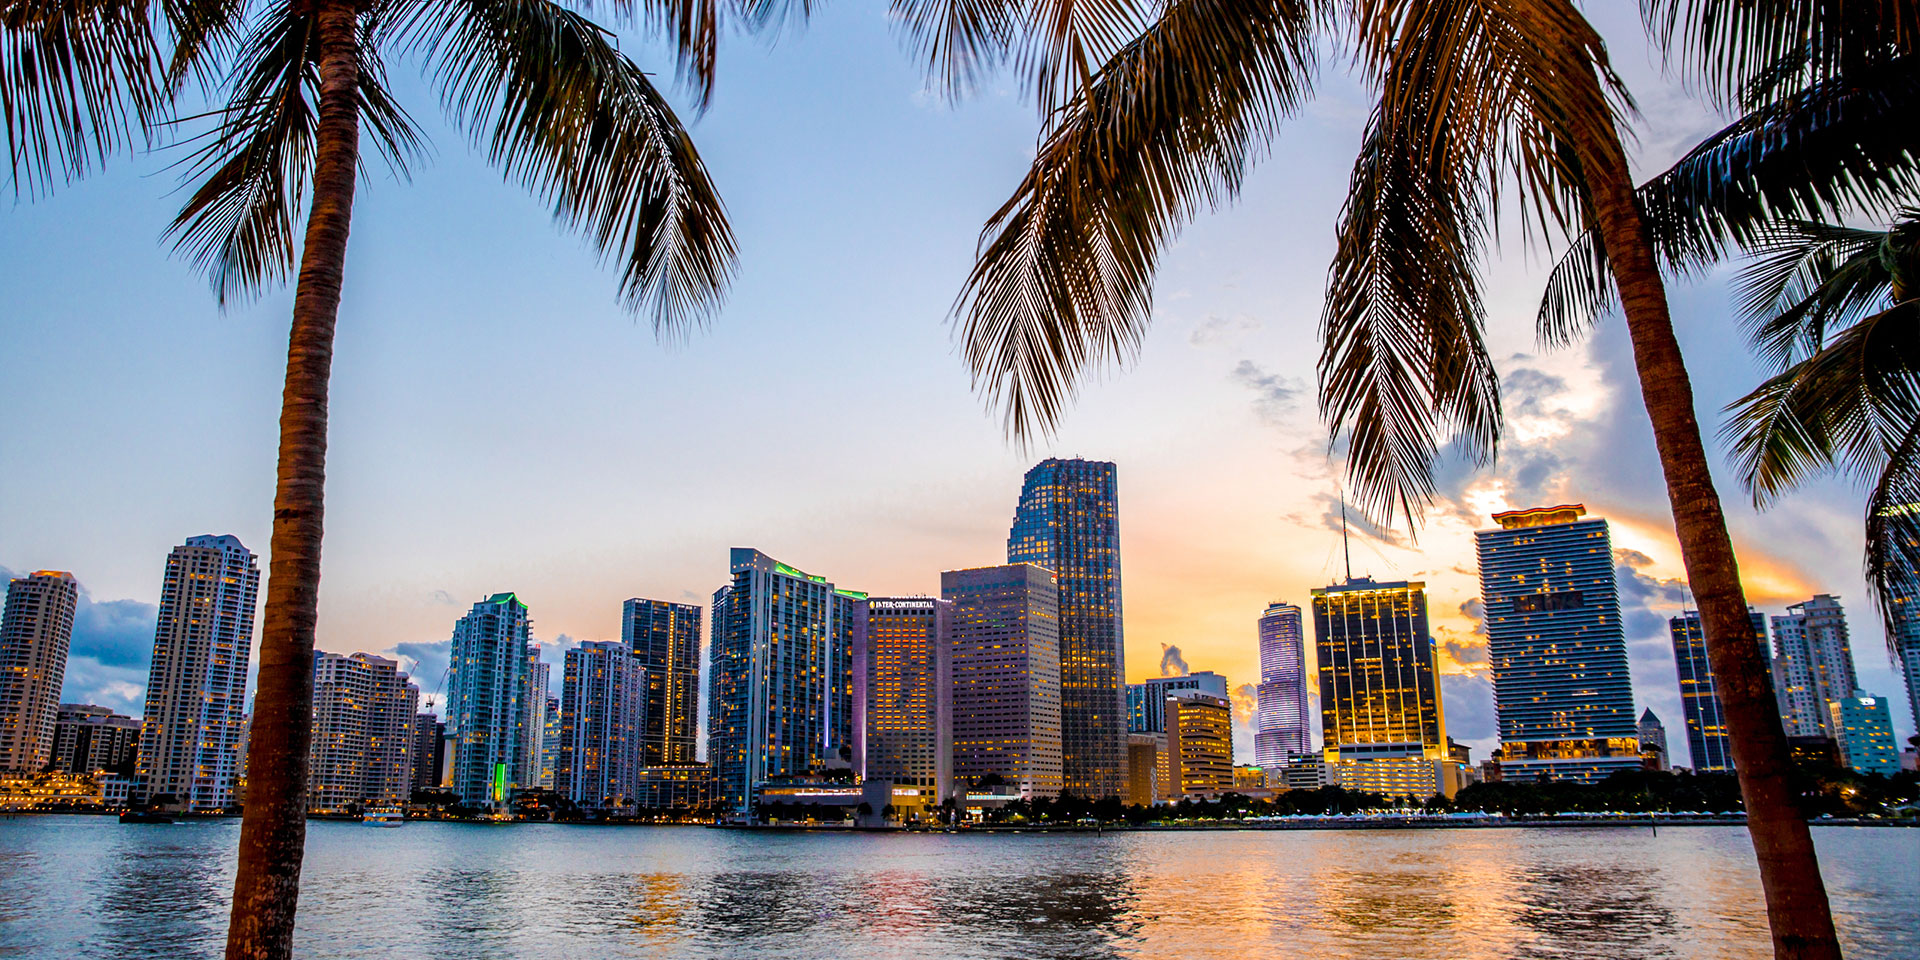 a panoramic picture of miami's coastline at sunset